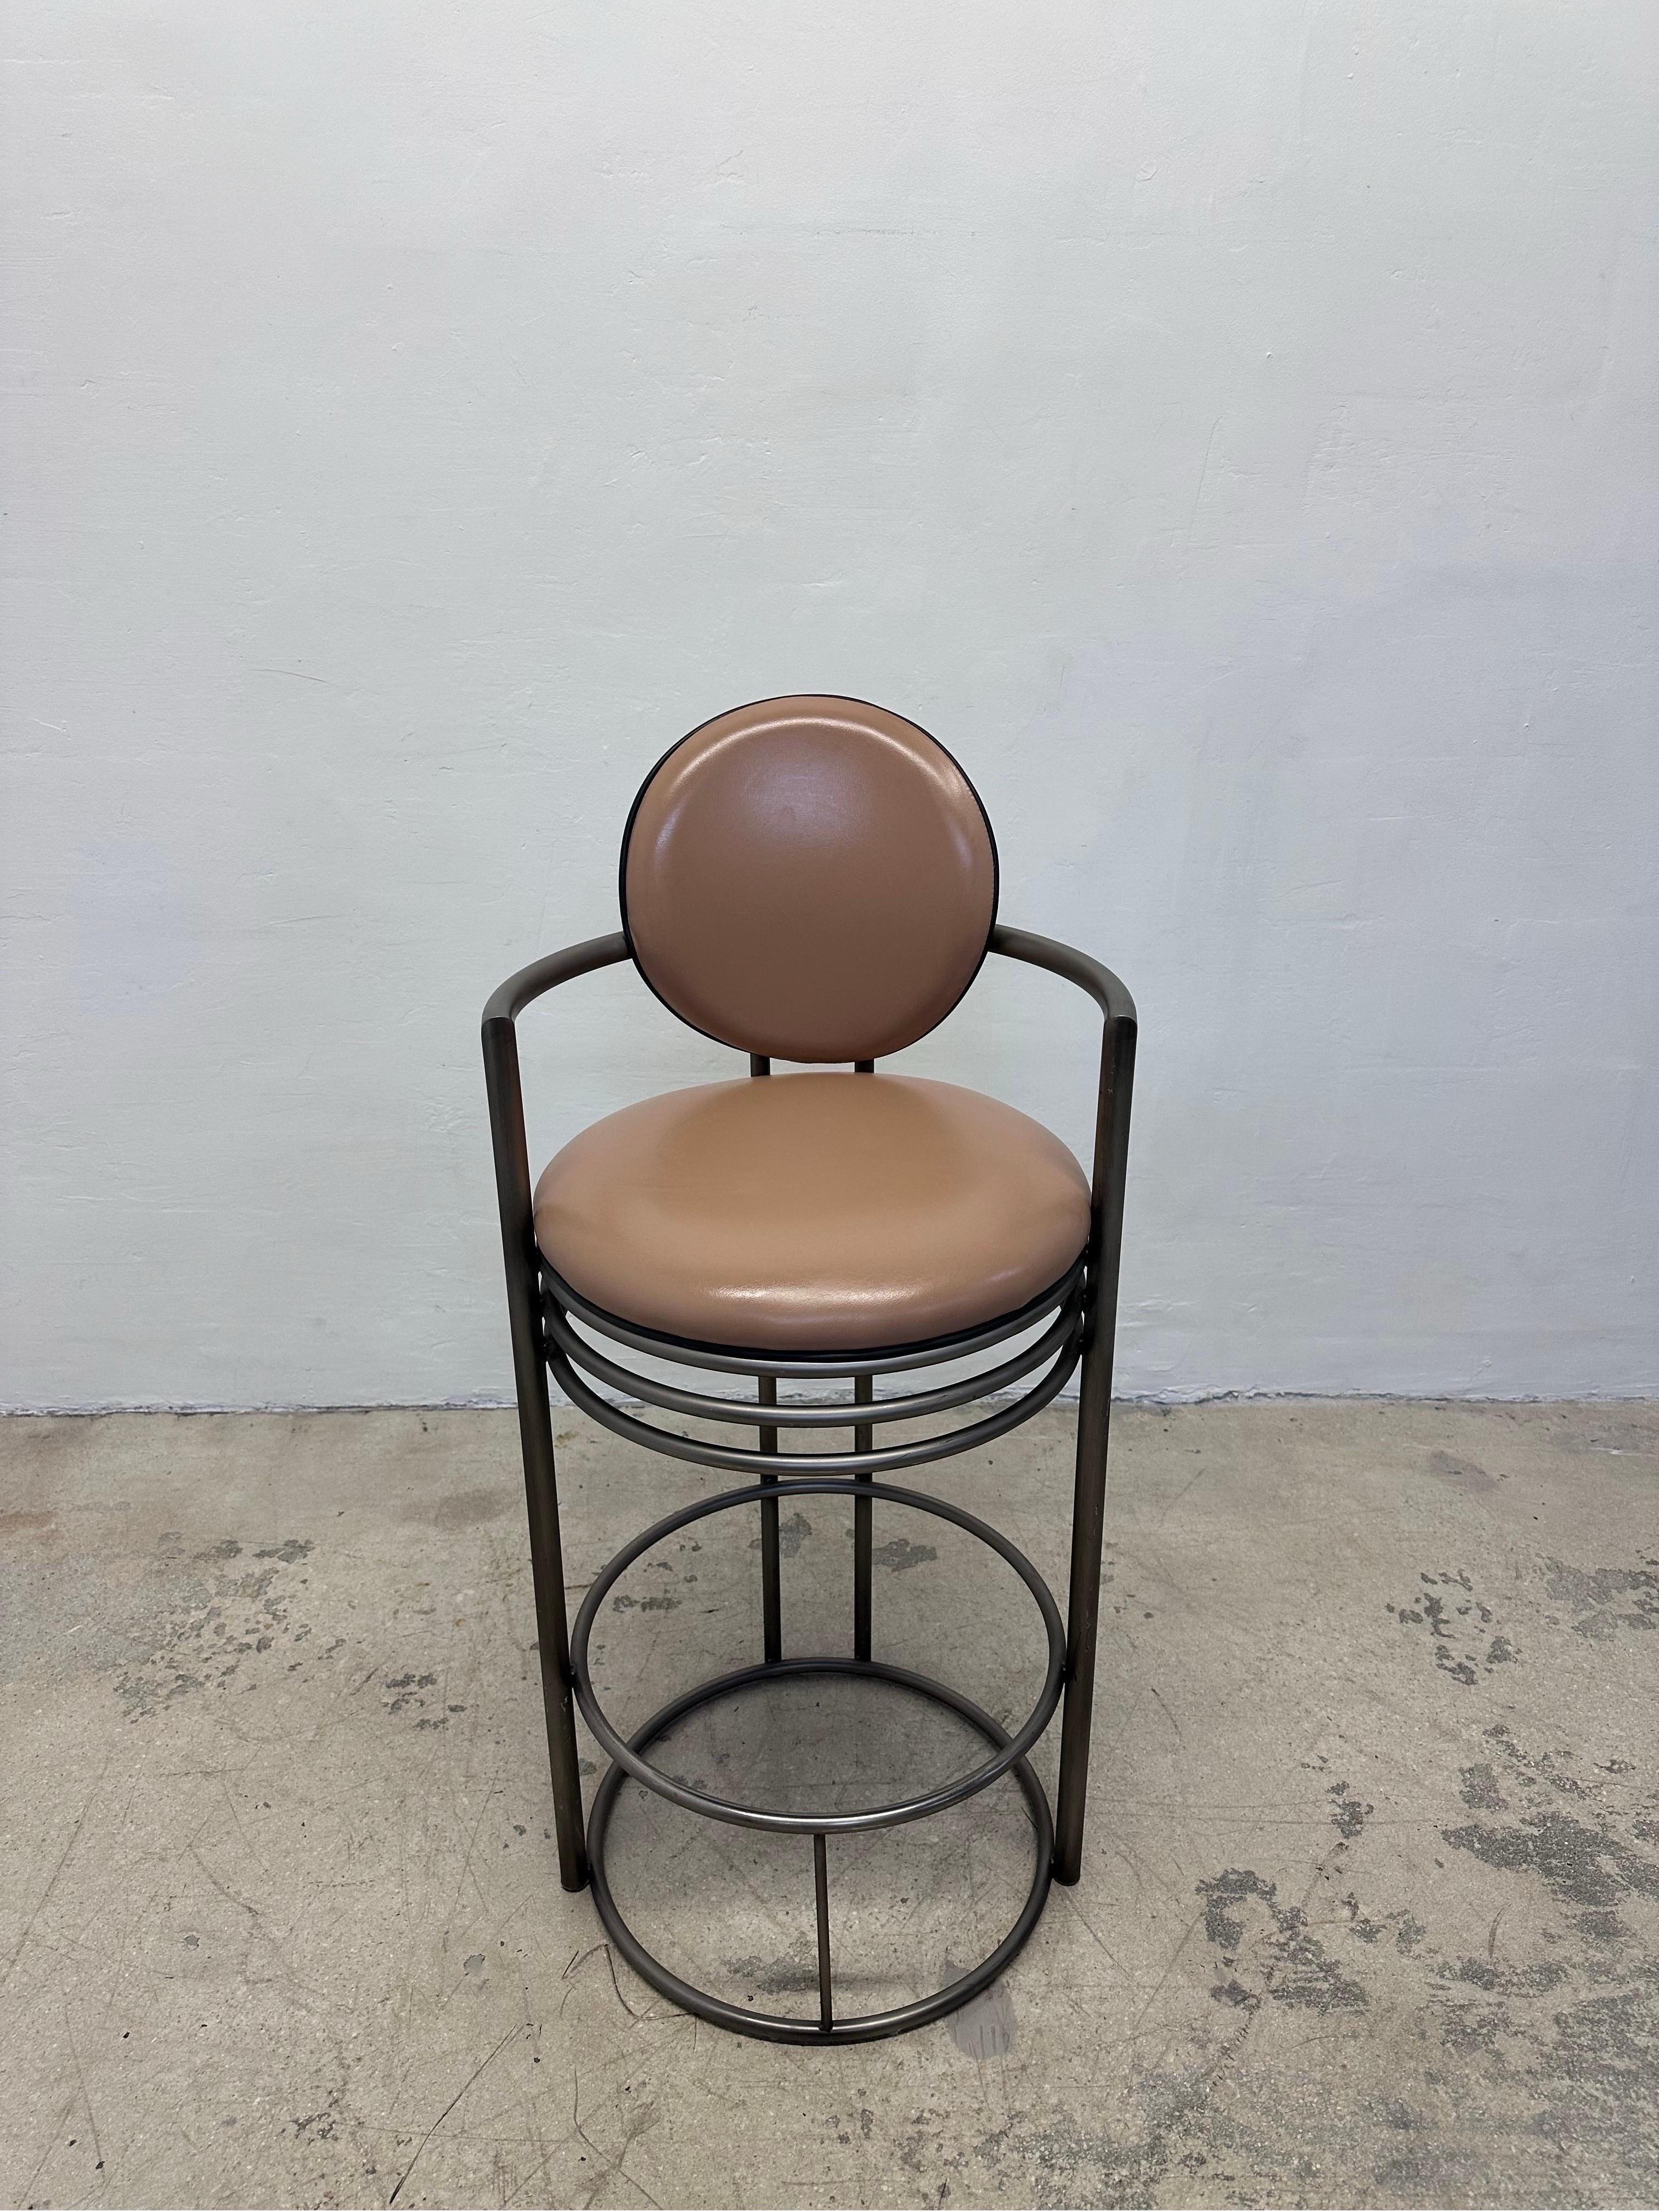 Modern Design Institute America Deco Revival Bar Stools With Arms, 1980s - Set of Three For Sale